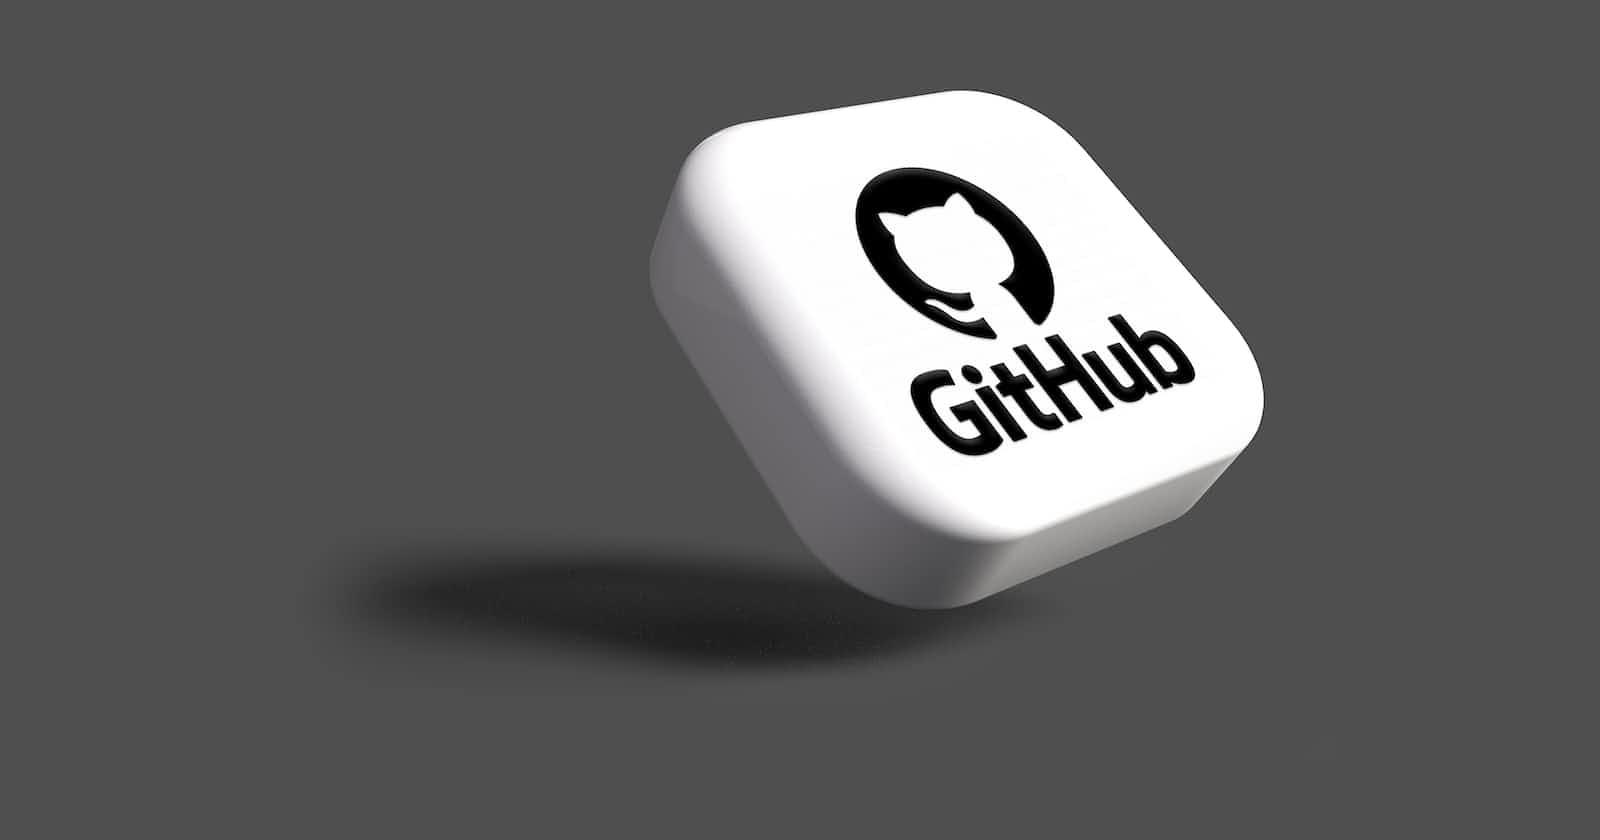 What are some benefits of using Git and Github to develop websites/web applications?